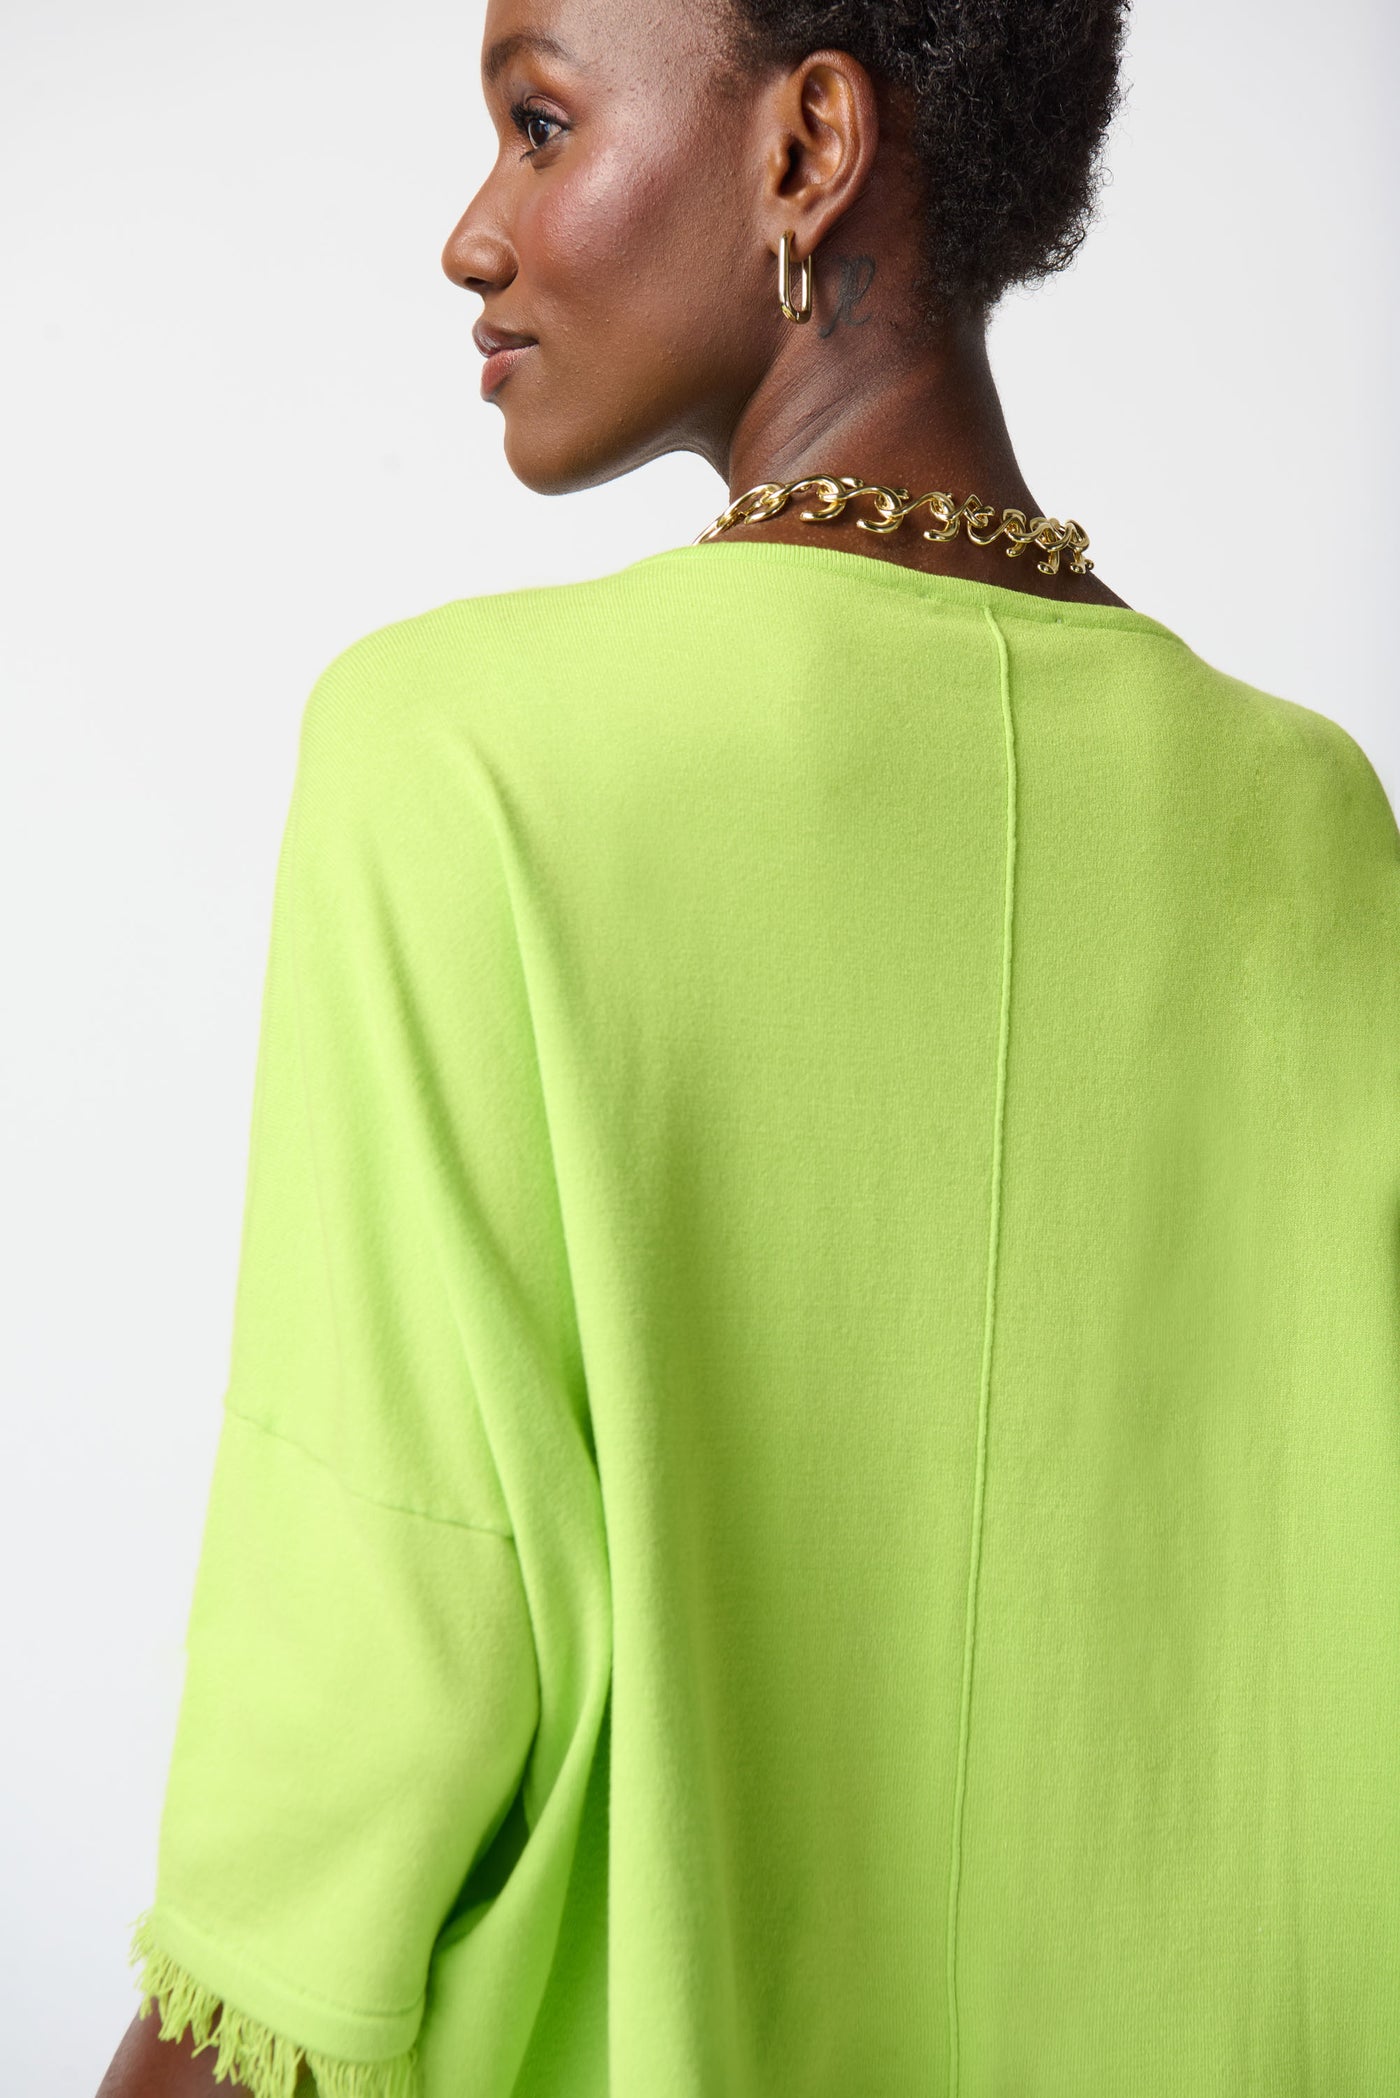 Joseph Ribkoff Lime Green Soft Knit Poncho with Fringes